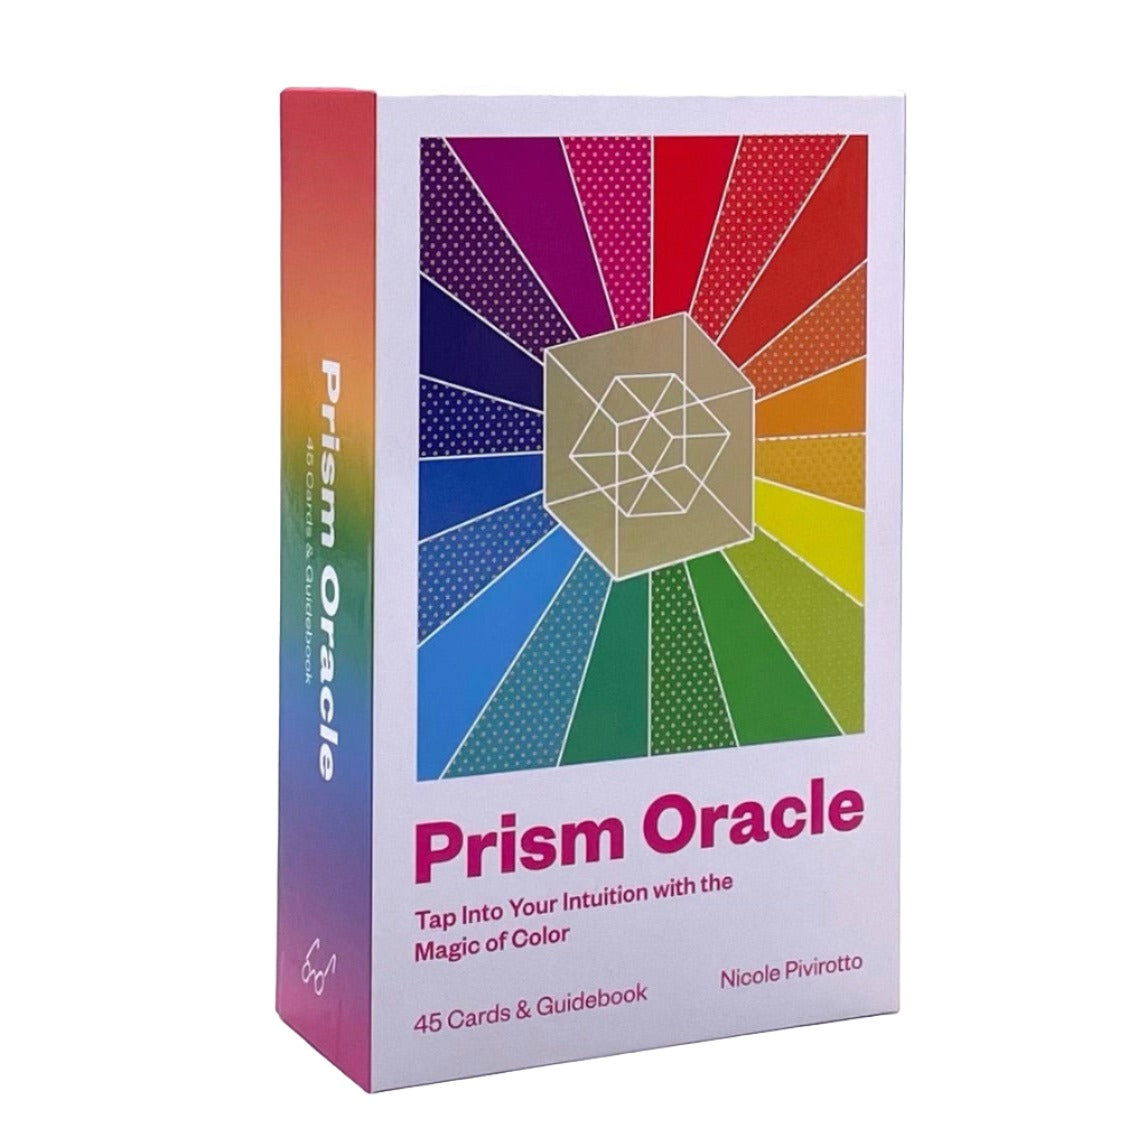 Box cover art of Prism Oracle Deck